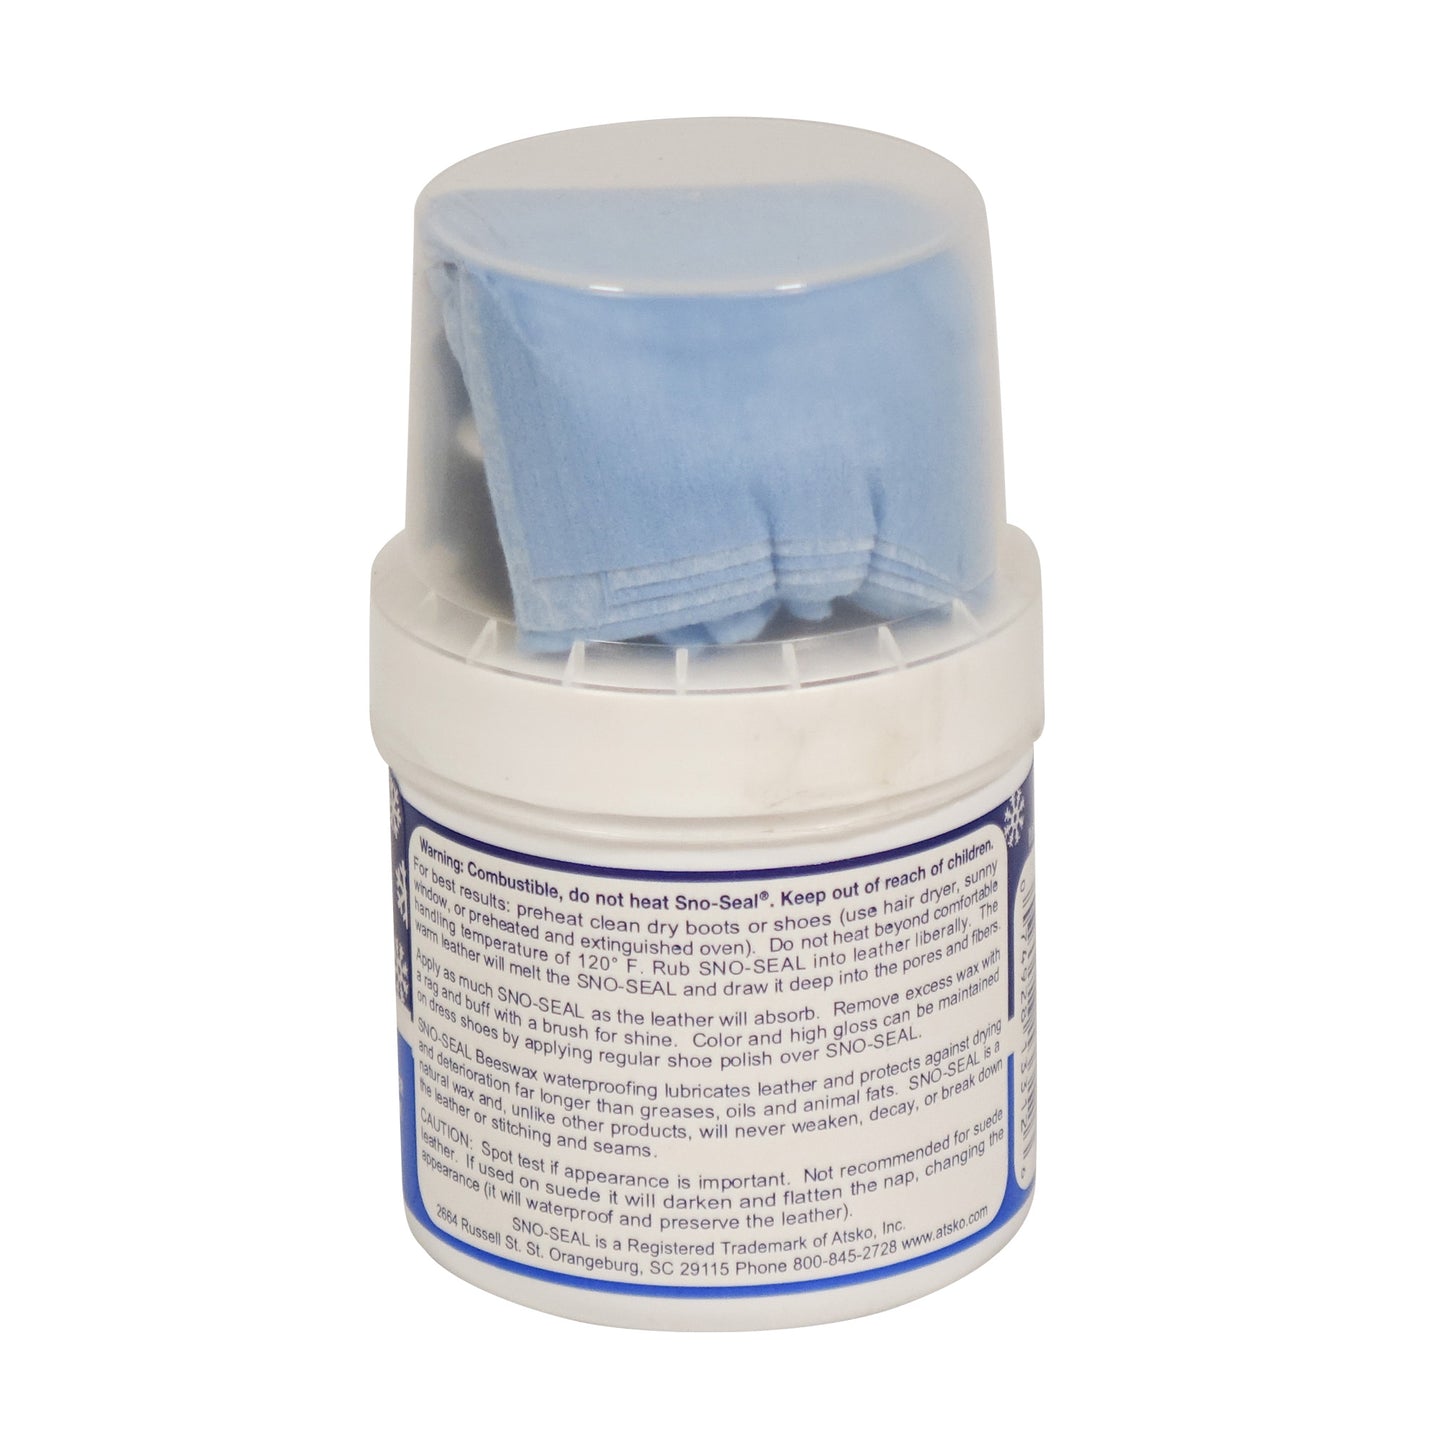 A jar of Mainers SNO-SEAL with Applicator, a blue cloth coated in beeswax for waterproofing.